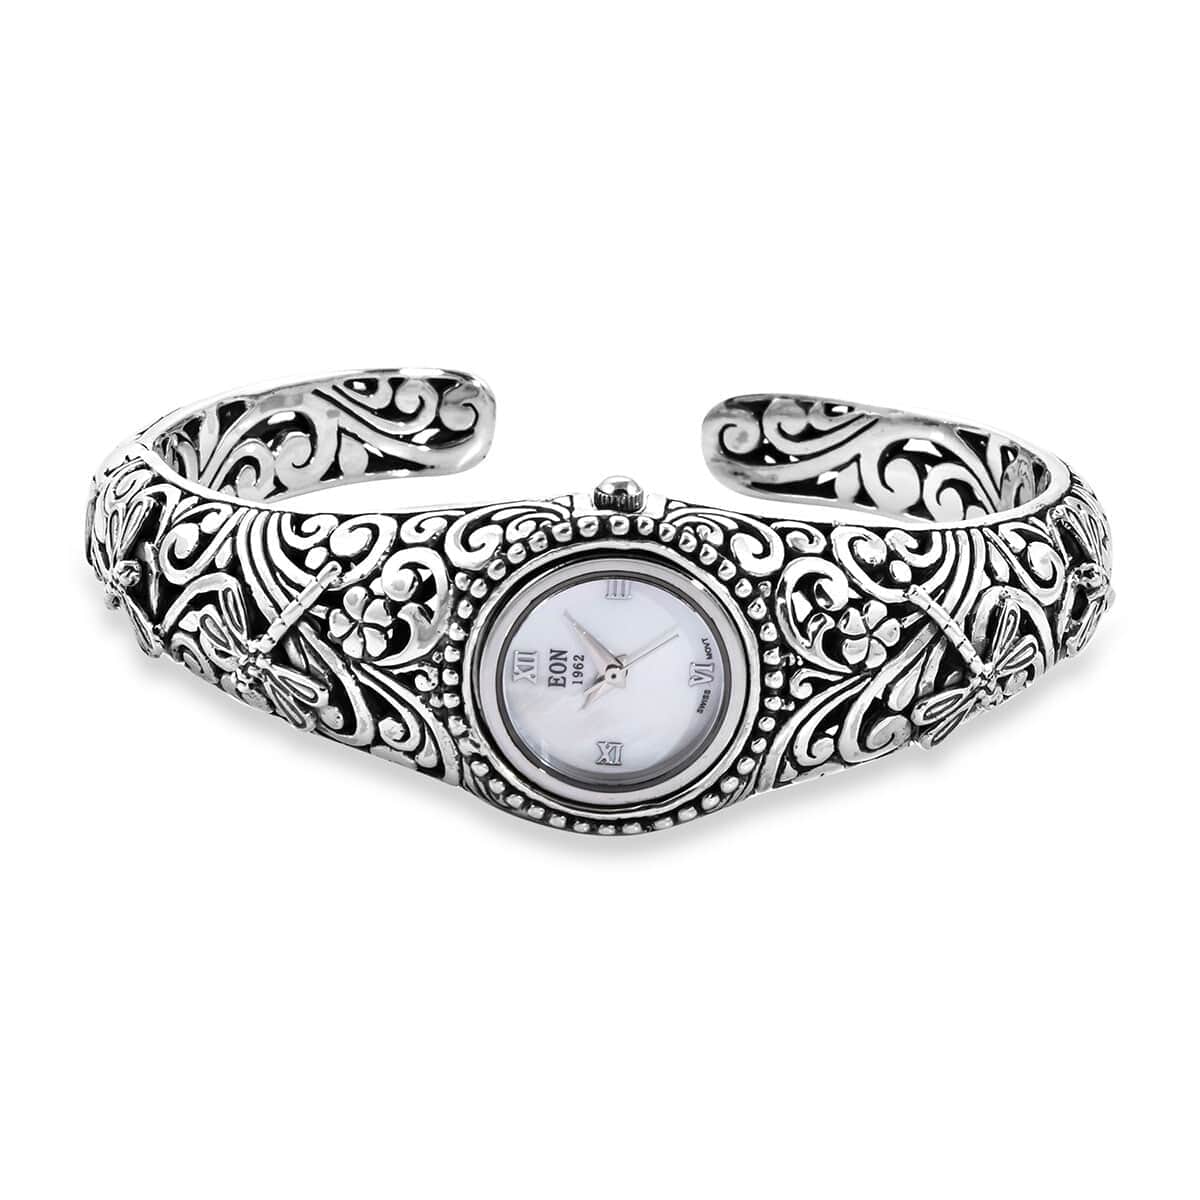 EON 1962 Swiss Movement Cuff Bracelet Watch in Sterling Silver with Stainless Steel Back (42.90 g) image number 0